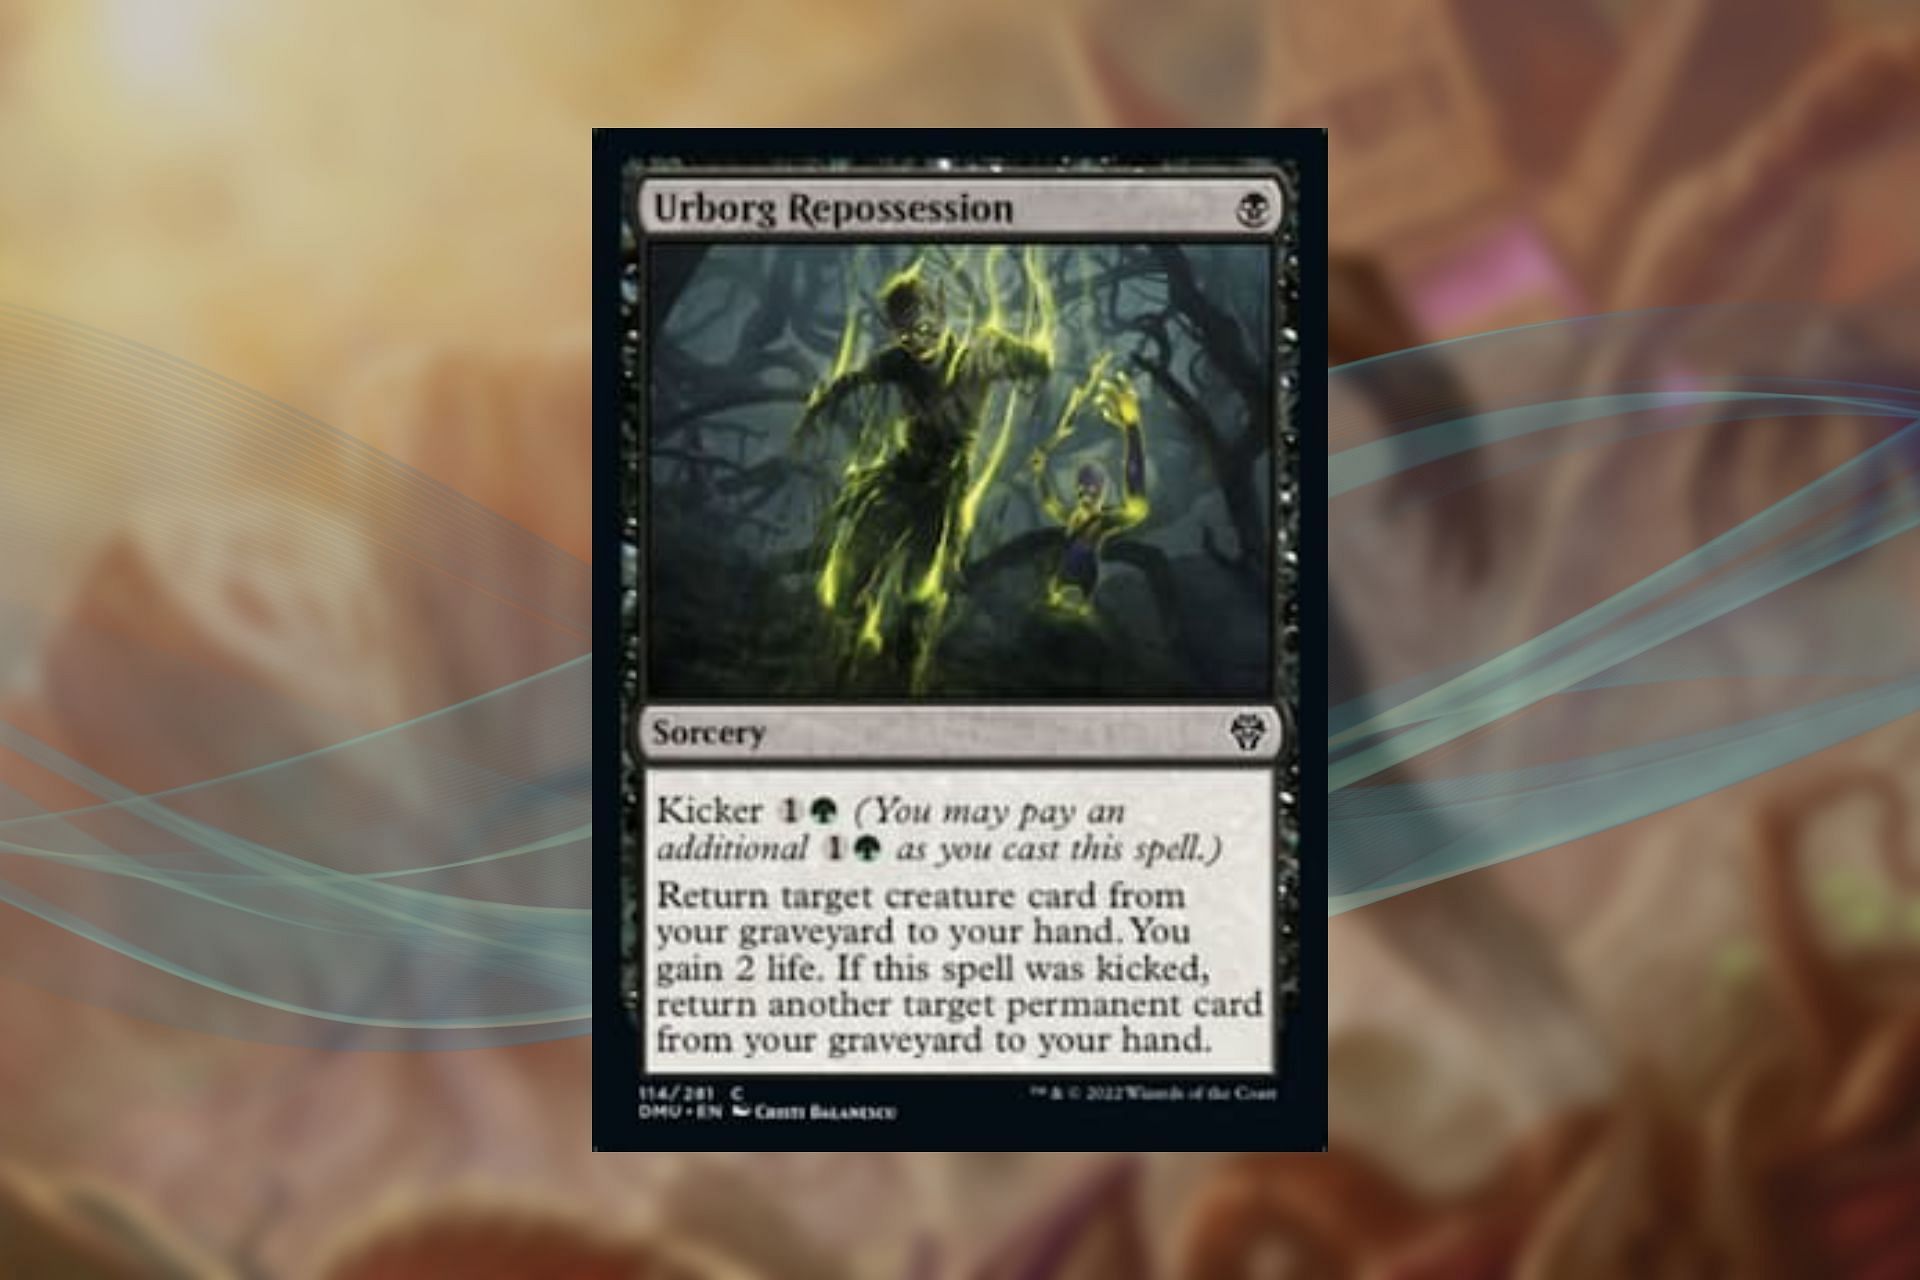 This particular card has various uses (Image via Wizards of the Coast)